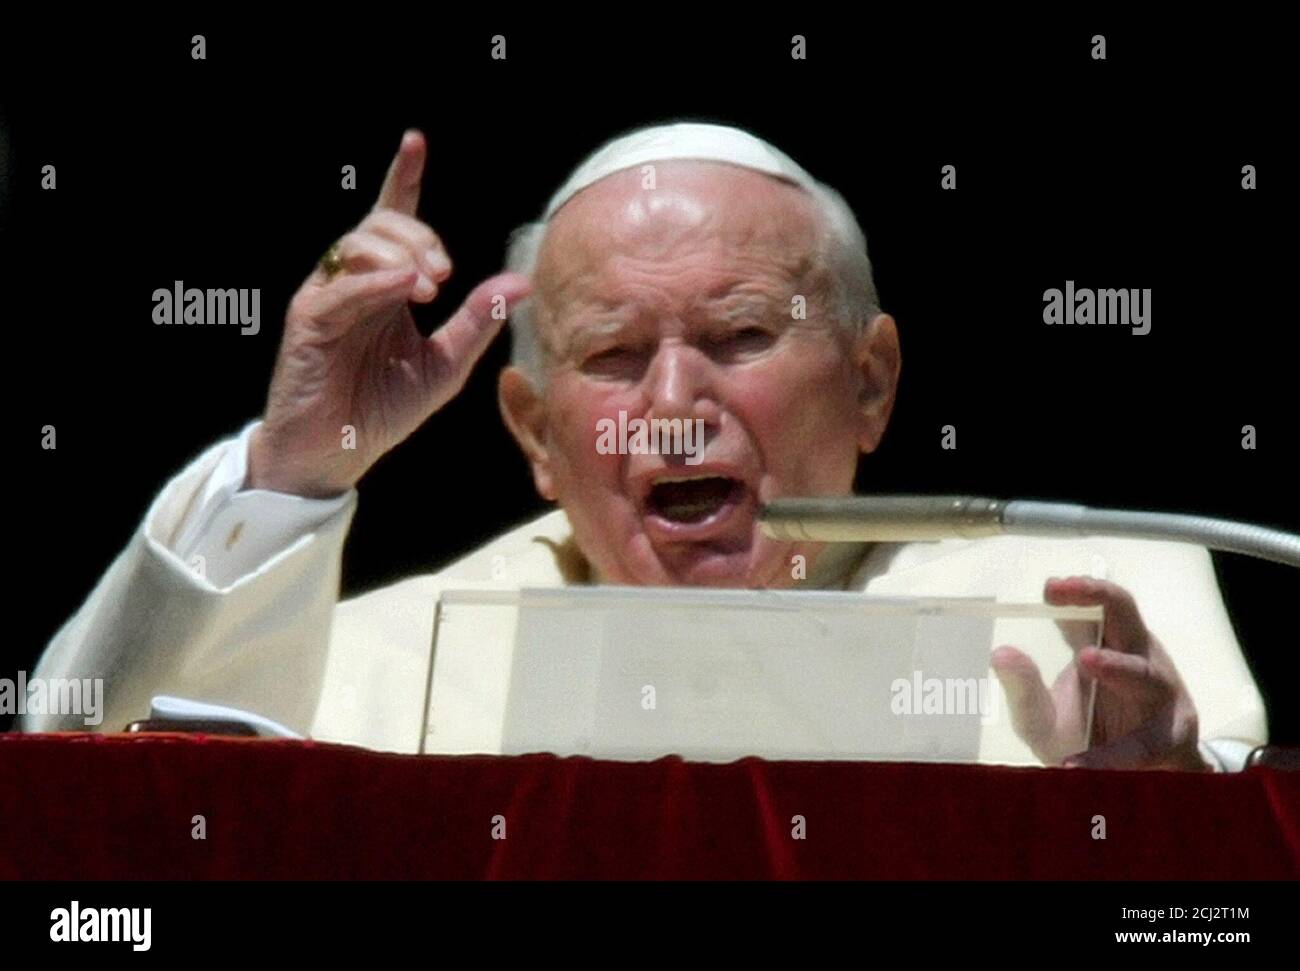 Pope John Paul II gestures during his Sunday blessing in Saint Peter's Square March 16, 2003.In a passionate plea for peace, Pope John Paul said on Sunday Iraq's leaders had a duty to cooperate with the international community to avert war and told both sides there was still time to negotiate. Departing at one point from his scripted Angelus address, he said that having lived through World War Two, he felt duty-bound to tell the world: 'Never again war'.  REUTERS/Max Rossi Stock Photo